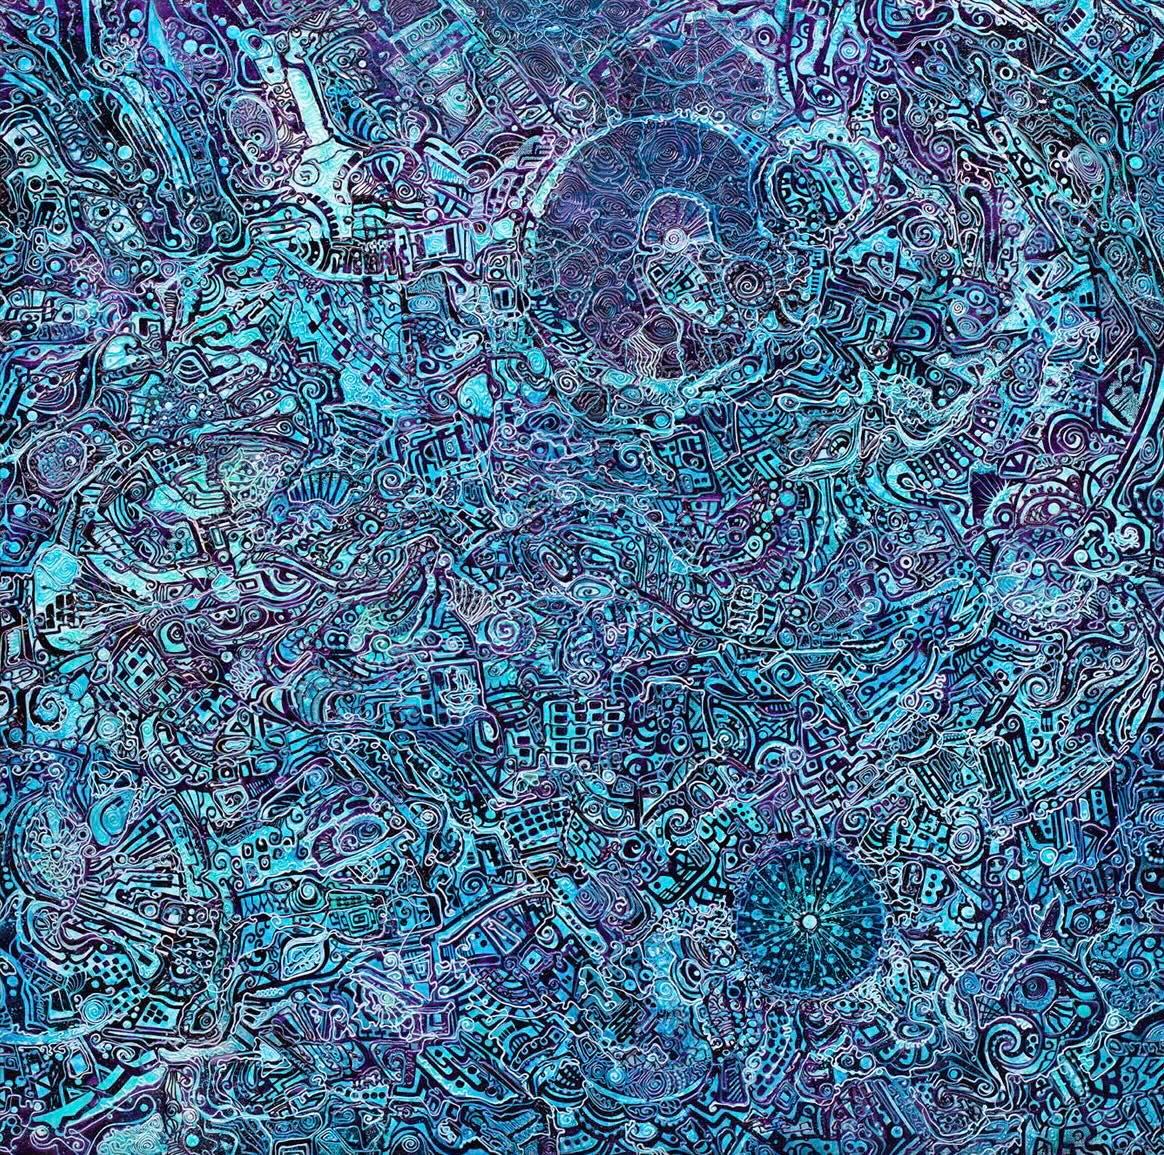 Alexander Arshansky Abstract Painting - A Textural Abstract Artwork "Blue Harmony"